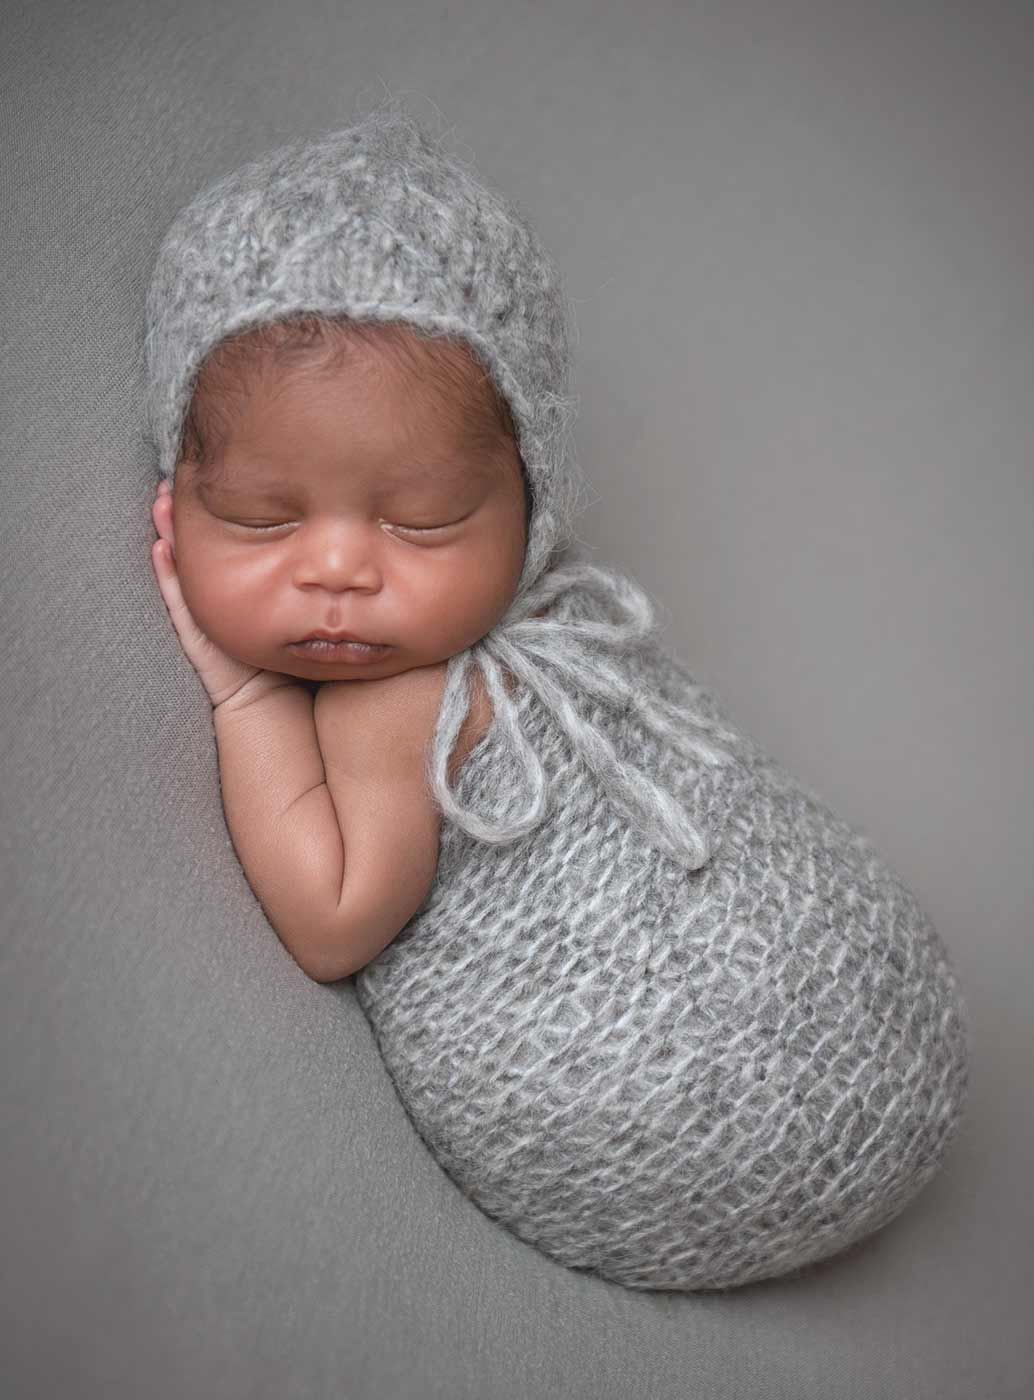 cozy swaddle and knit hat baby infant sleeping nyc